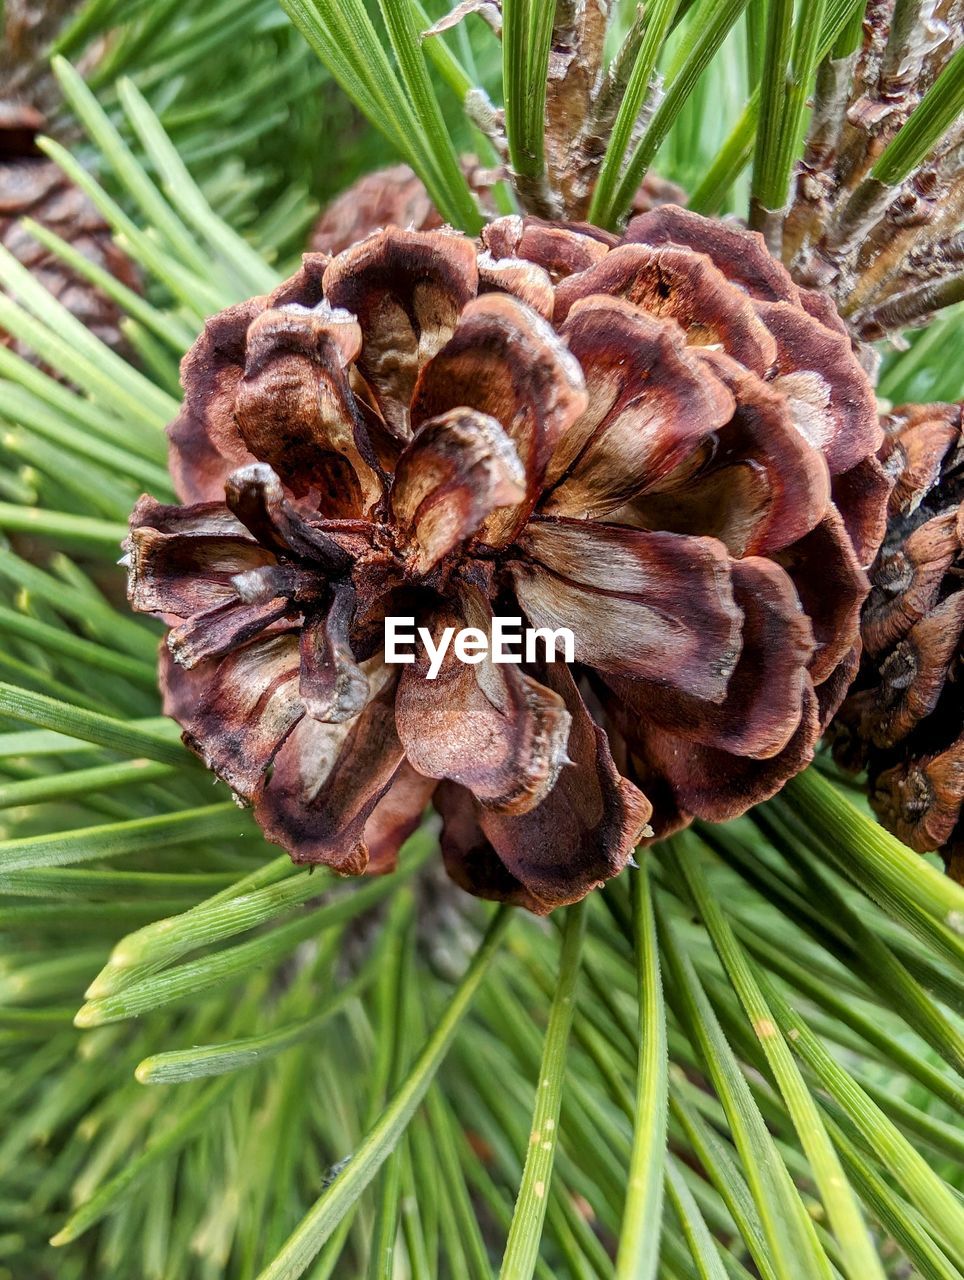 tree, plant, growth, nature, conifer cone, close-up, beauty in nature, pine cone, branch, flower, spruce, fir, leaf, green, no people, plant part, pine tree, coniferous tree, pine, pinaceae, food, food and drink, day, freshness, palm tree, outdoors, focus on foreground, brown, flowering plant